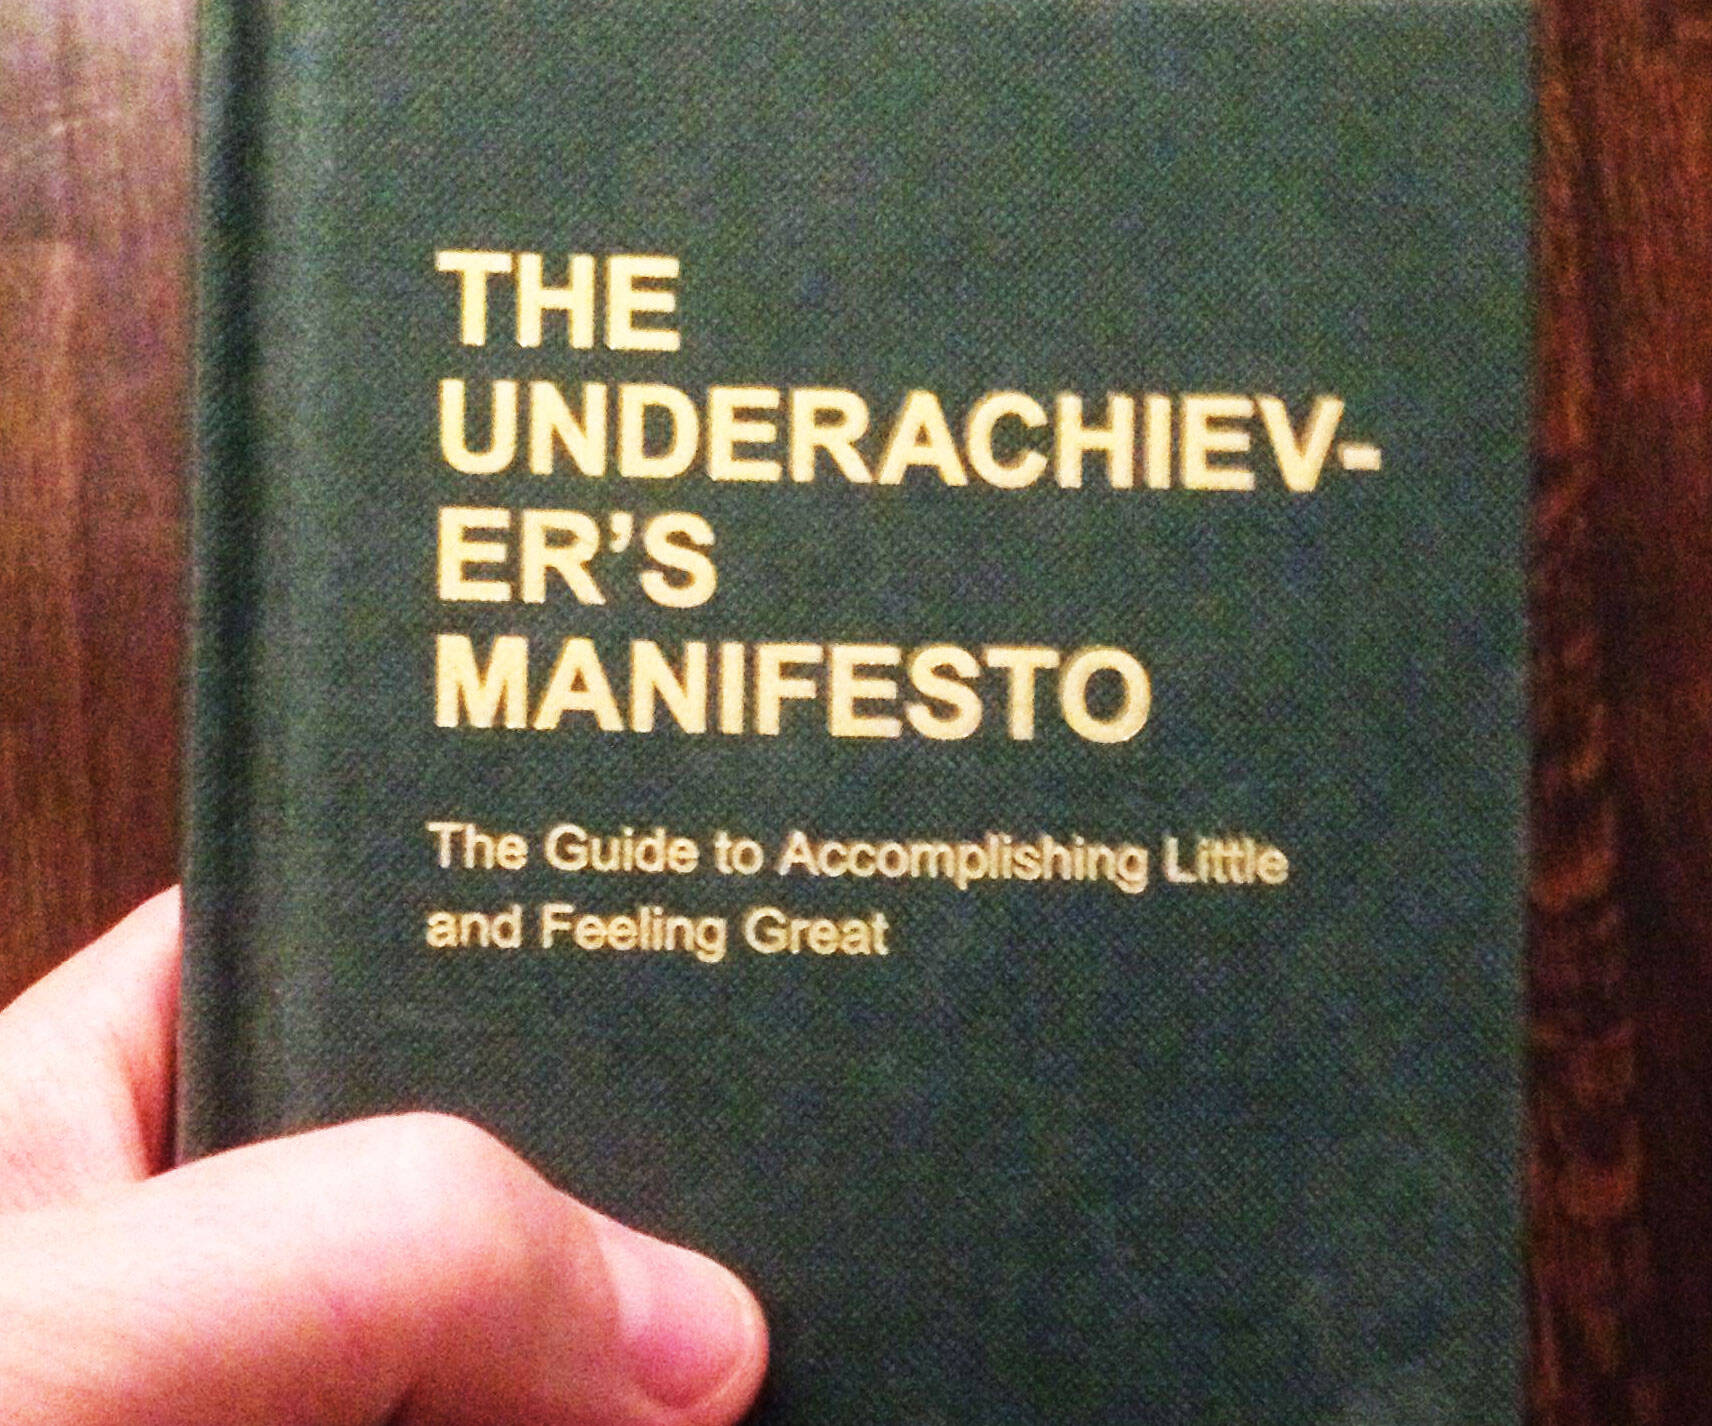 The Underachiever's Manifesto - coolthings.us